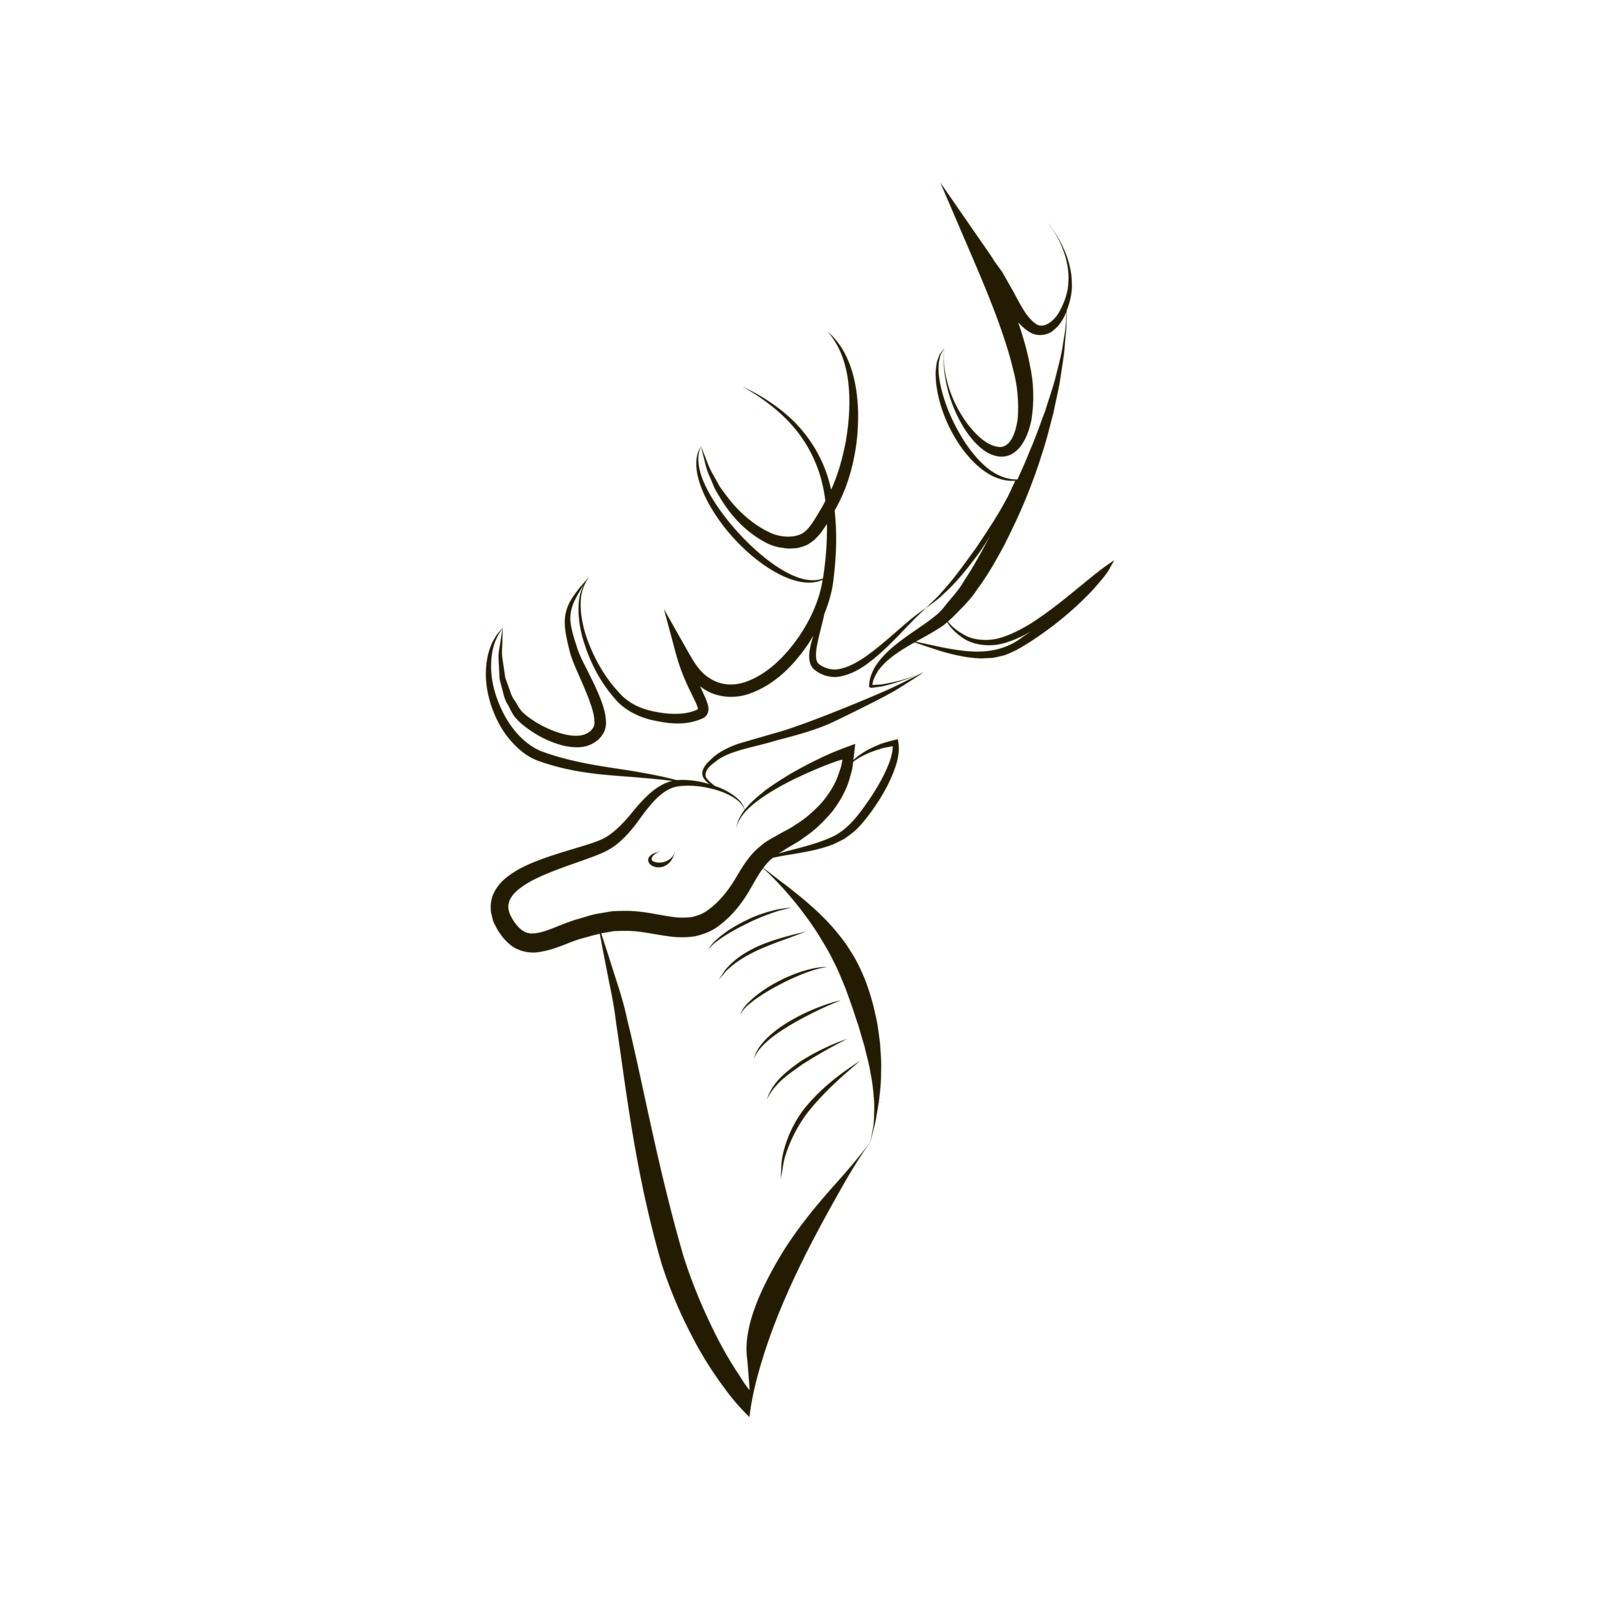 Hand drawing silhouette of deer head. Side view. Graceful minimalism style. Black and white emblem, logo. Vector graphics illustration of animals for wedding, anniversary, birthday, invitation. EPS 10